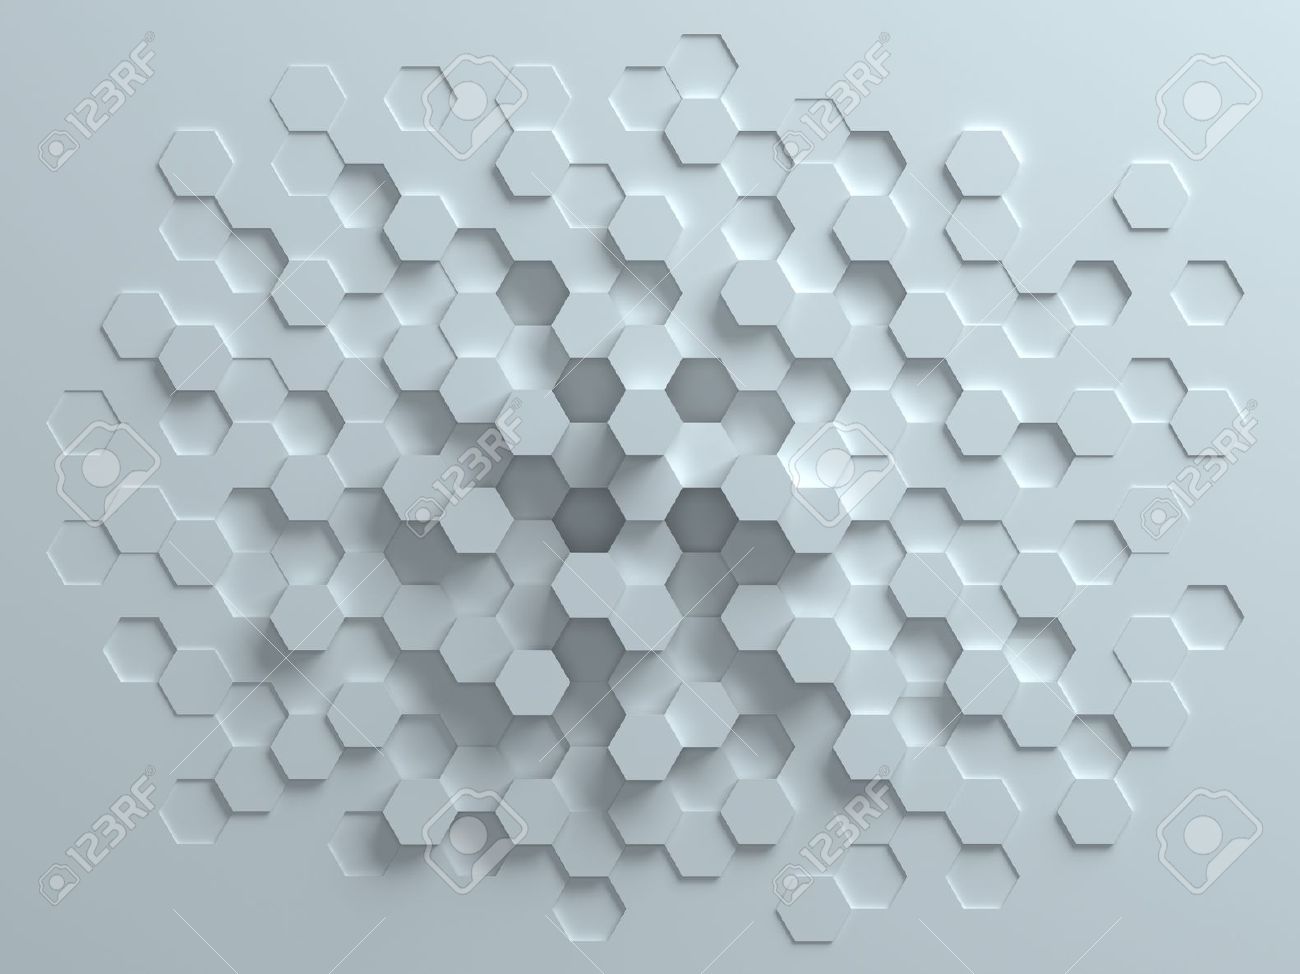 Hexagonal Abstract 3d Background Stock Photo Picture And Royalty